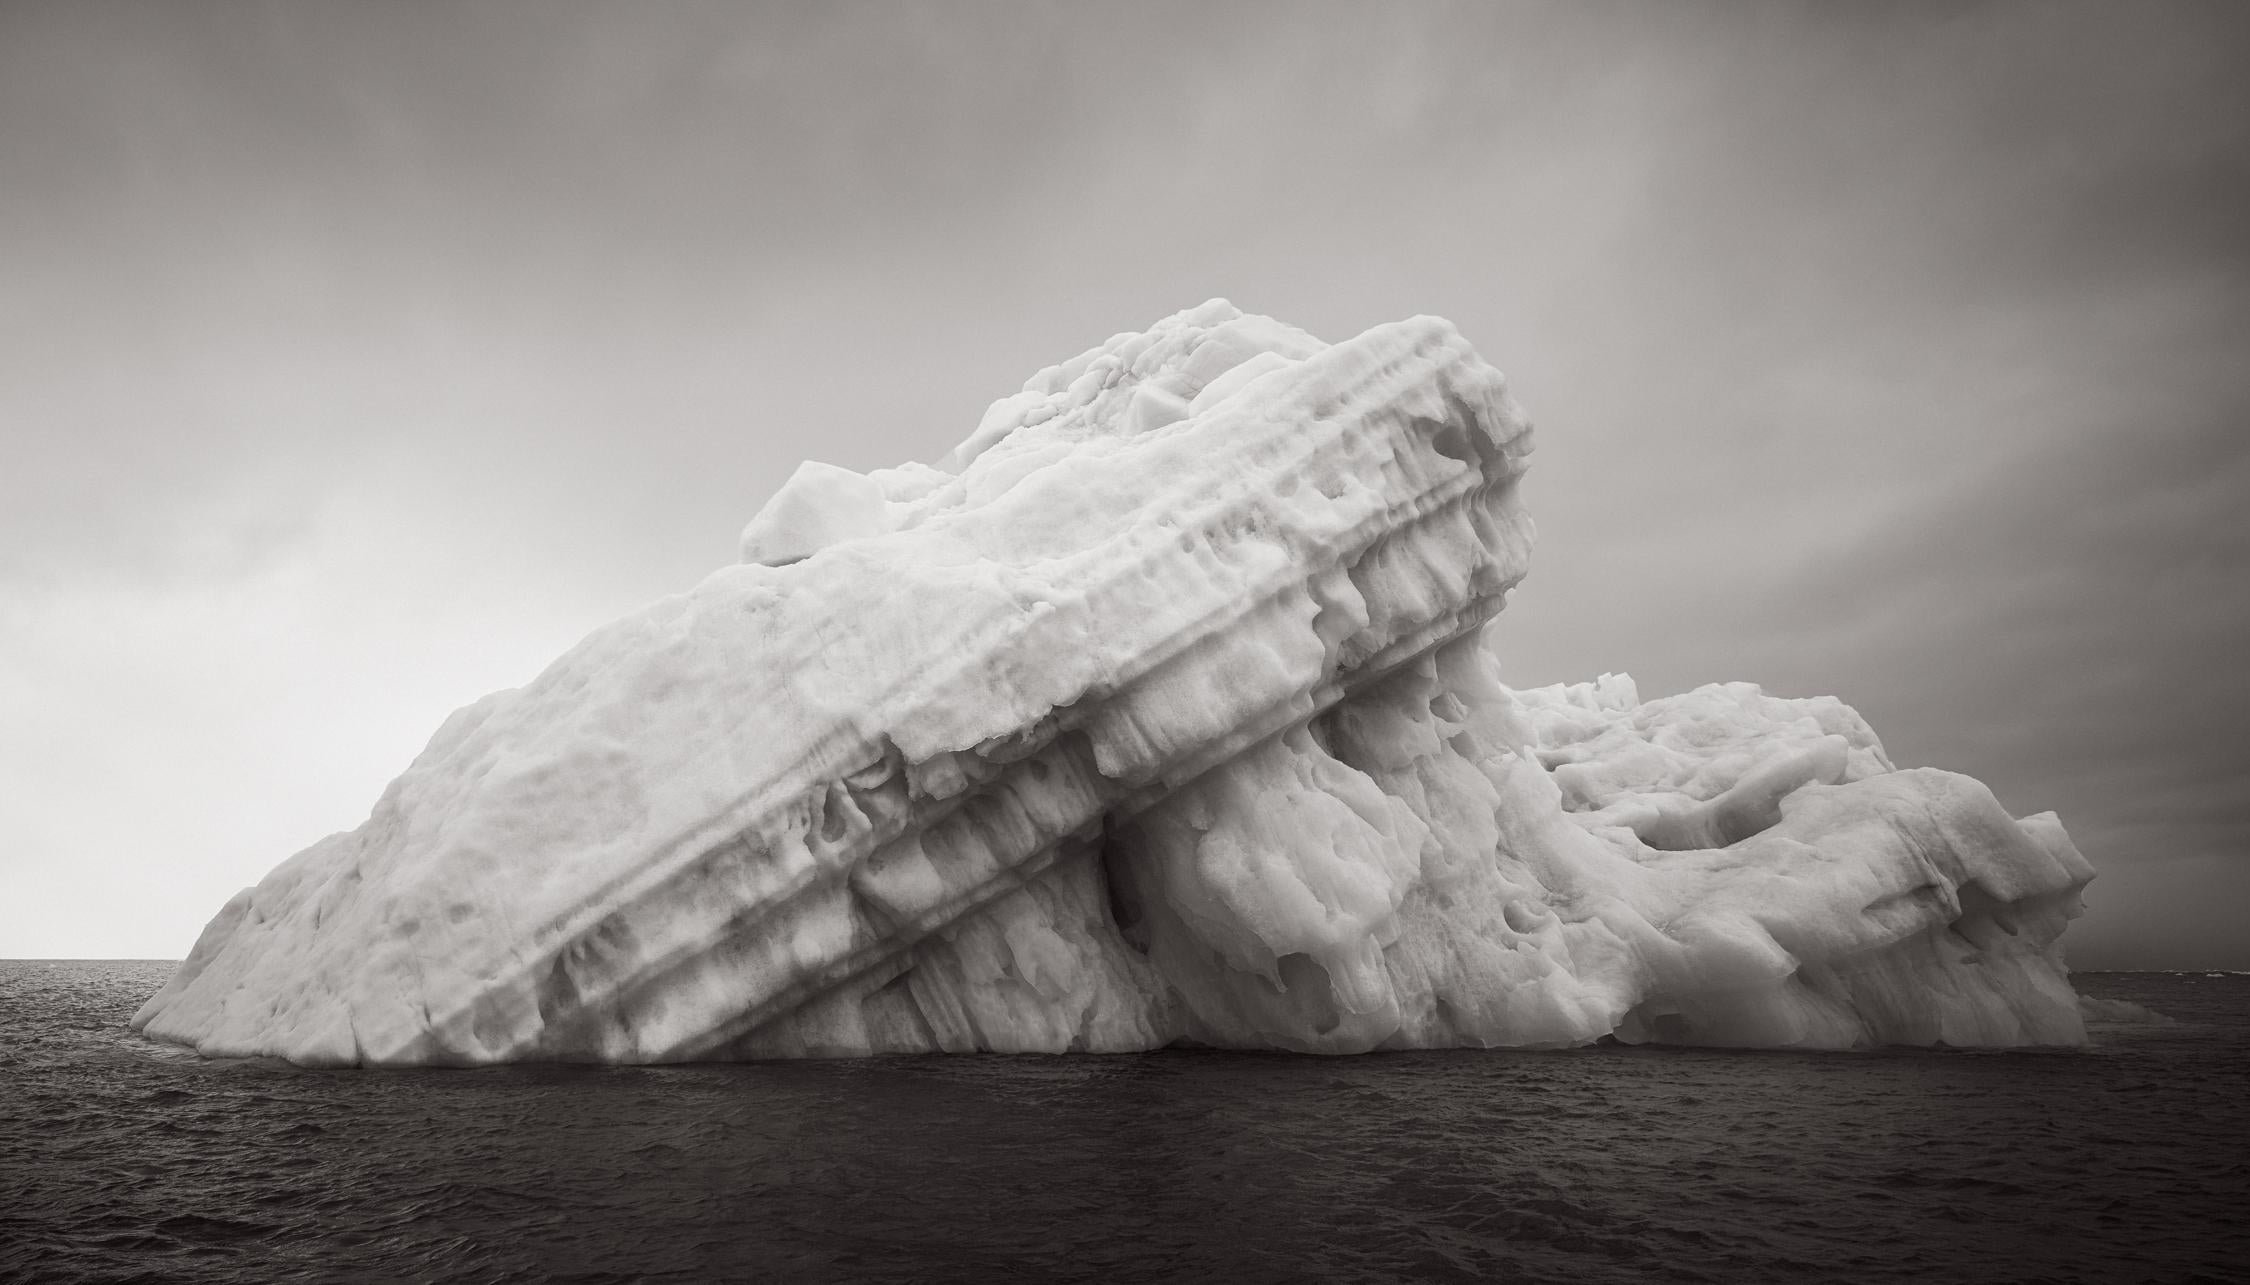 Drew Doggett Black and White Photograph - Sculpted Ice Form in Arctic Waters, Abstract, Nature